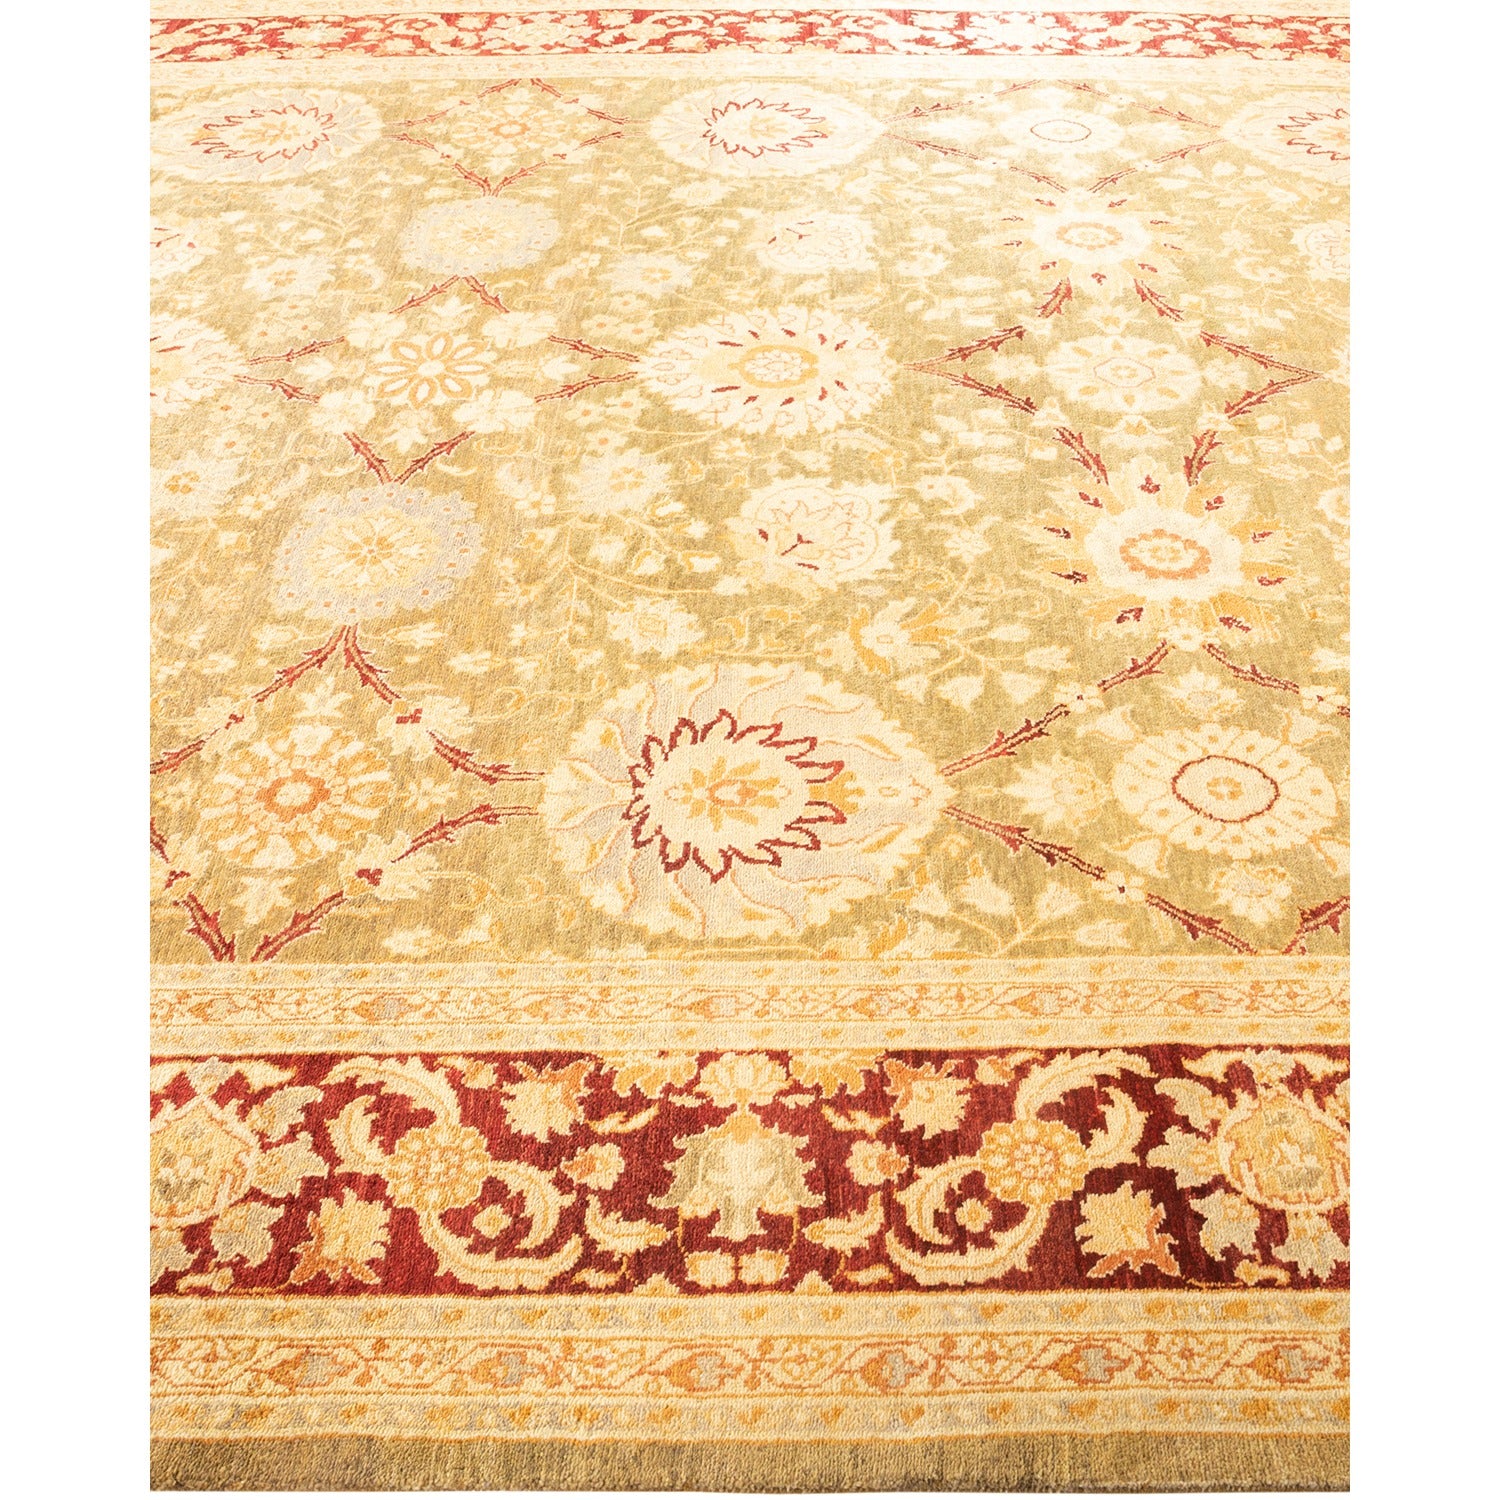 Exquisite handwoven rug with intricate floral and geometric motifs.